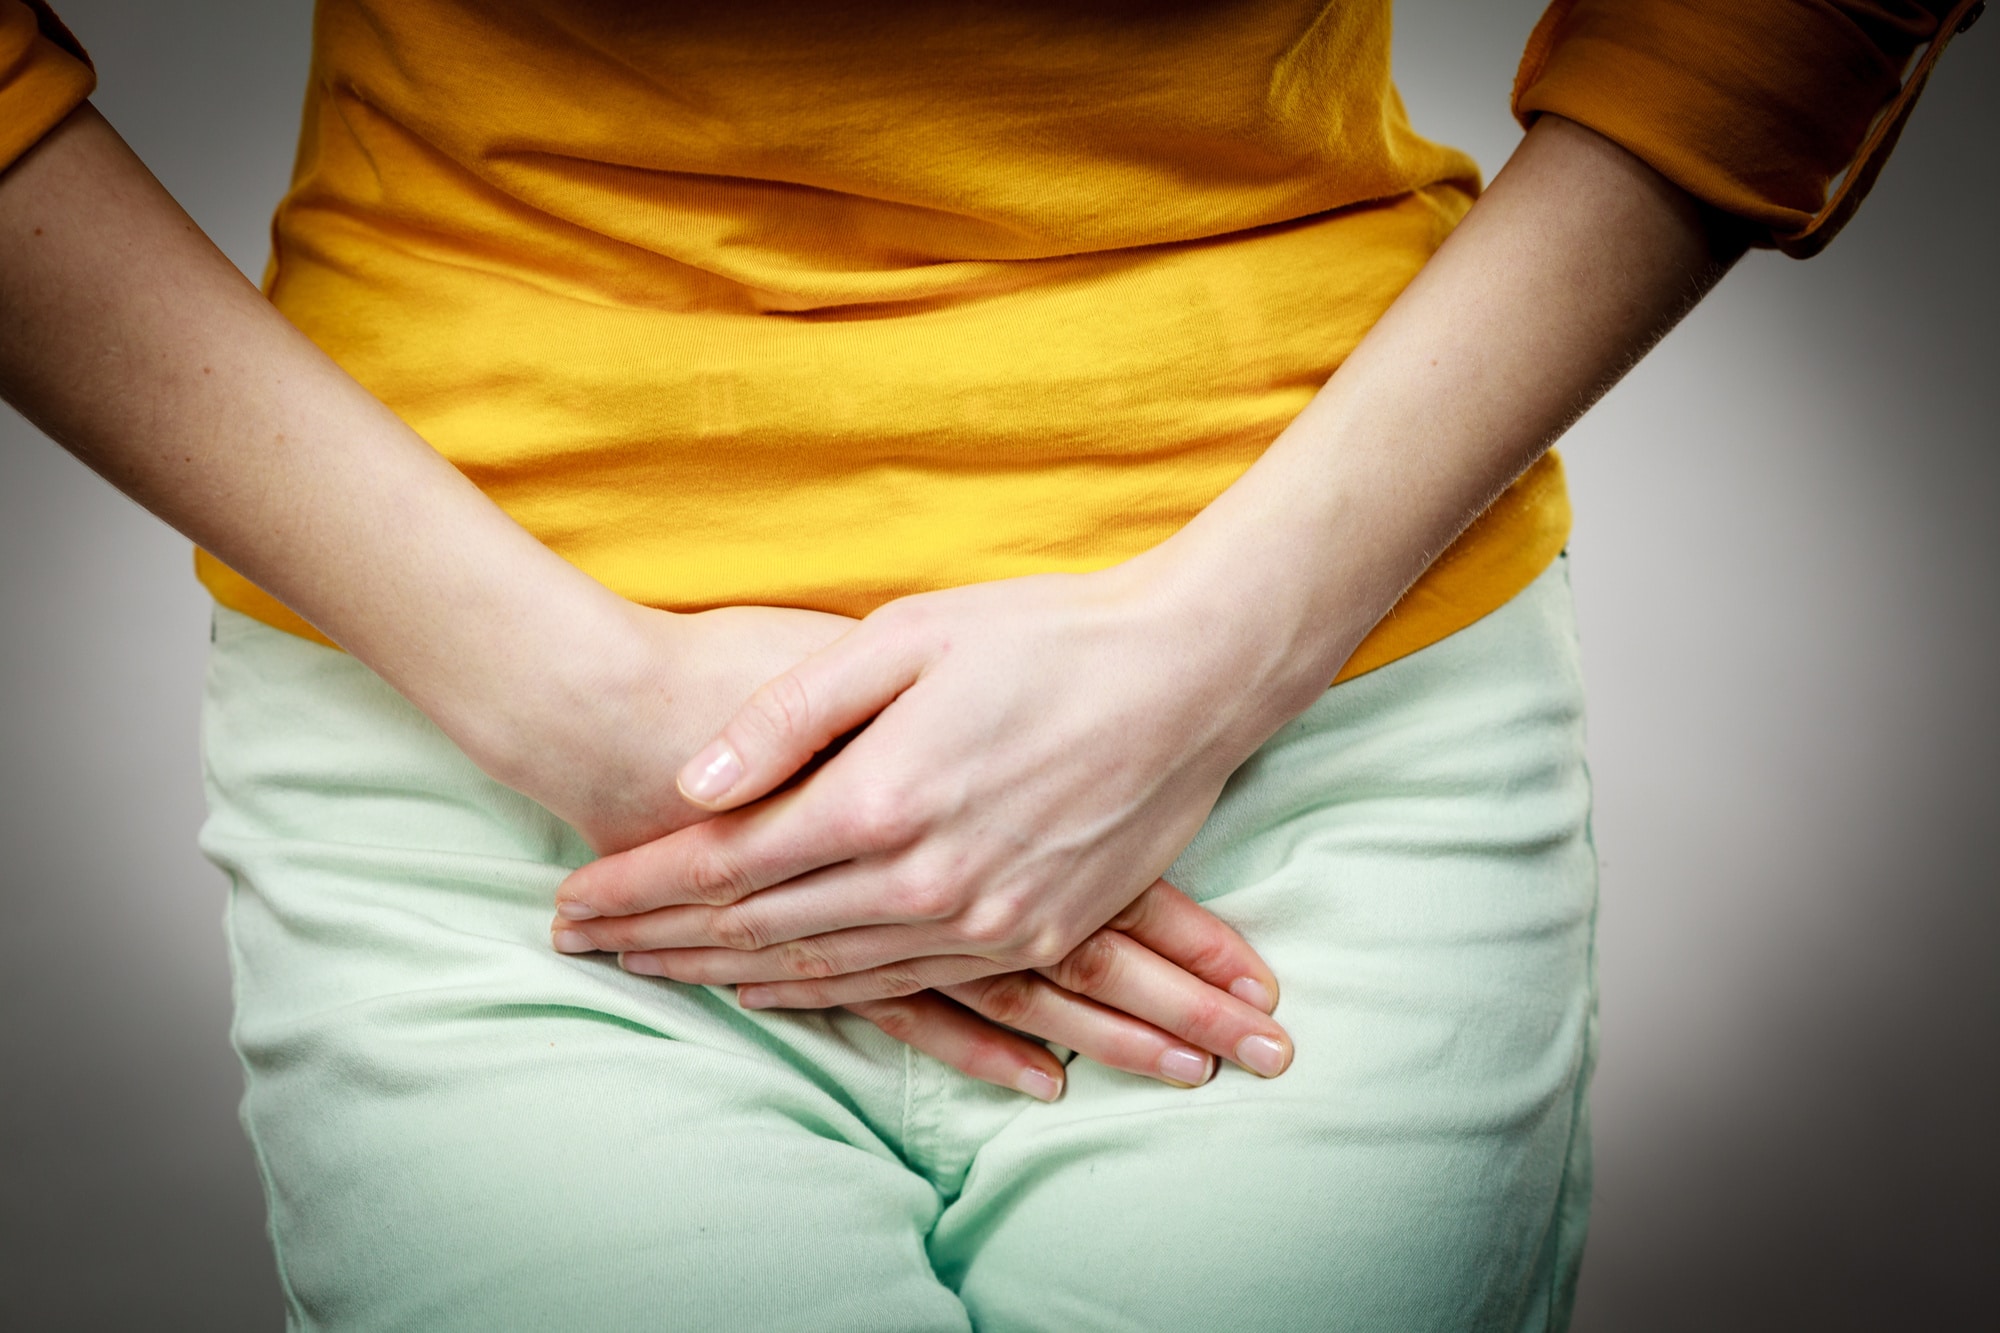 Chronic bladder infections